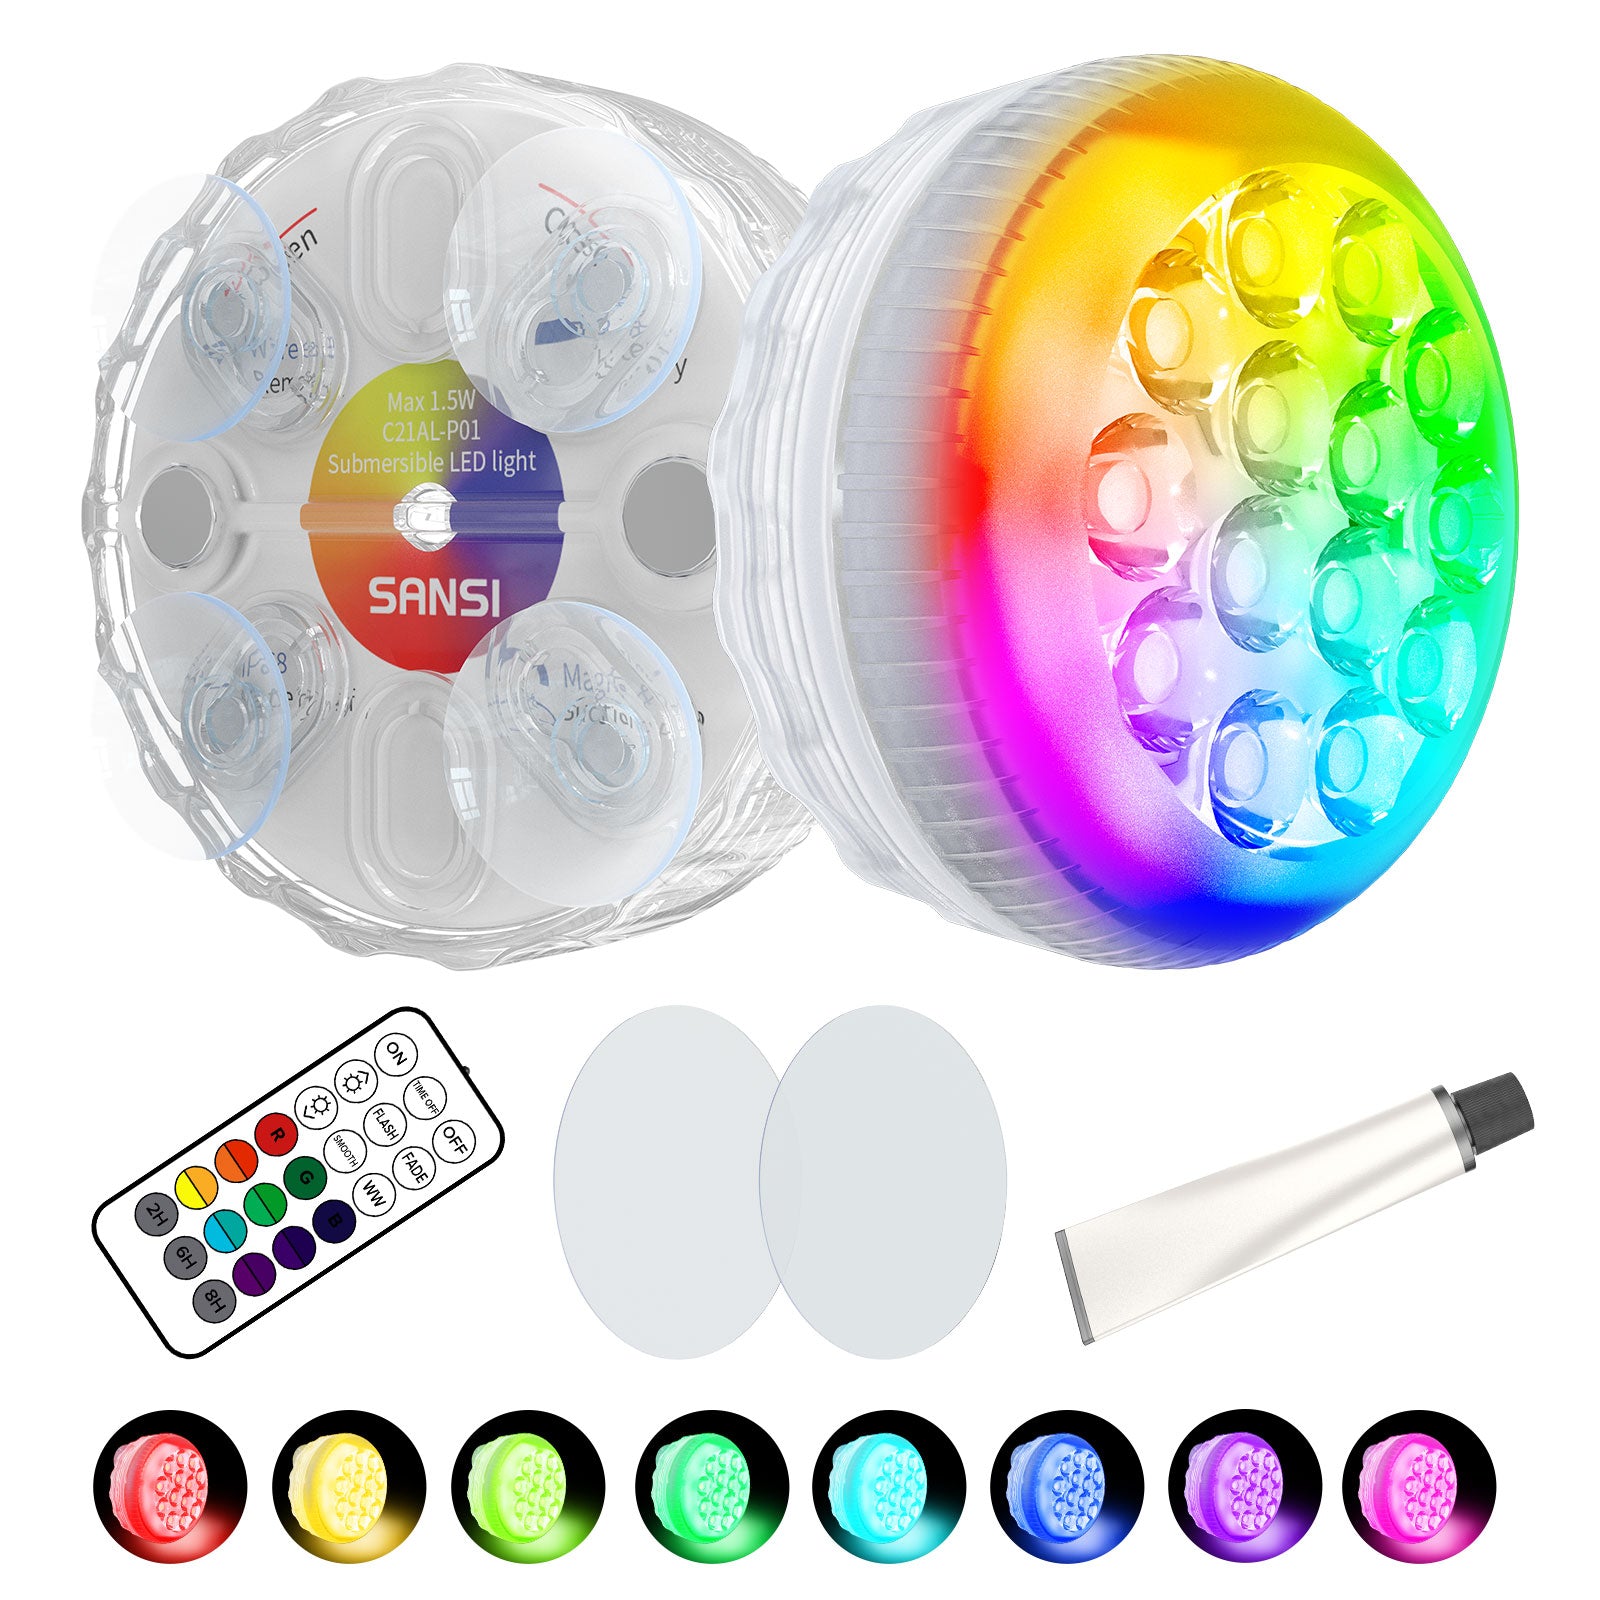 Upgraded RGB LED Submersible Pool Light (US ONLY)